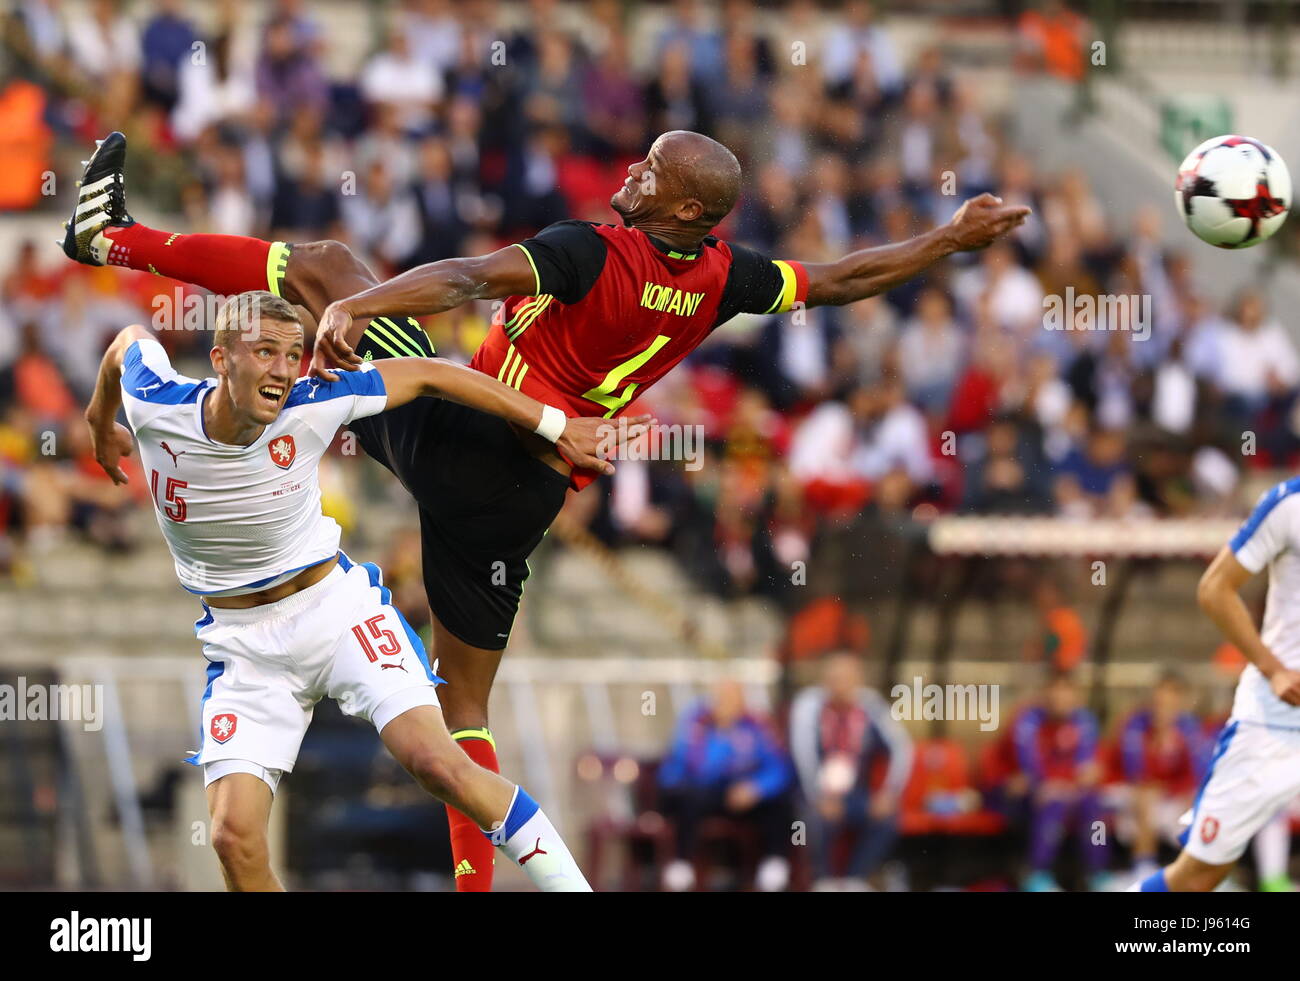 Brussels. 5th June, 2017. Vincent Kompany (R) of Beligum vies with Tomas Soucek of the Czech Republic during an international friendly soccer match between Belgium and the Czech Republic in Brussels, Belgium on June 5, 2017. Beligum won 2-1. Credit: Gong Bing/Xinhua/Alamy Live News Stock Photo